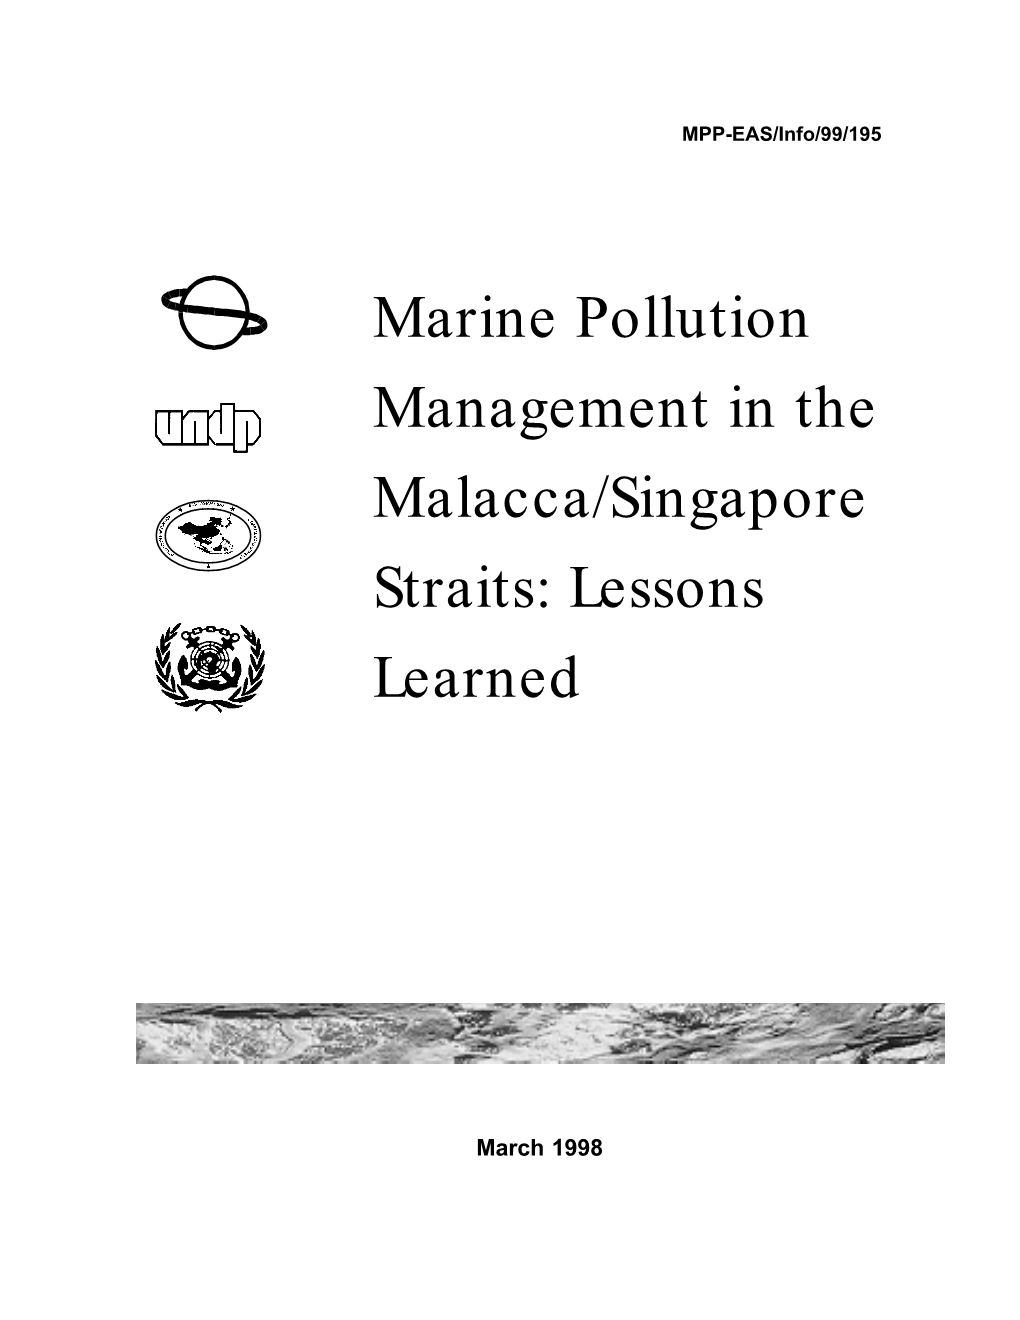 Marine Pollution Management in the Malacca/Singapore Straits: Lessons Learned